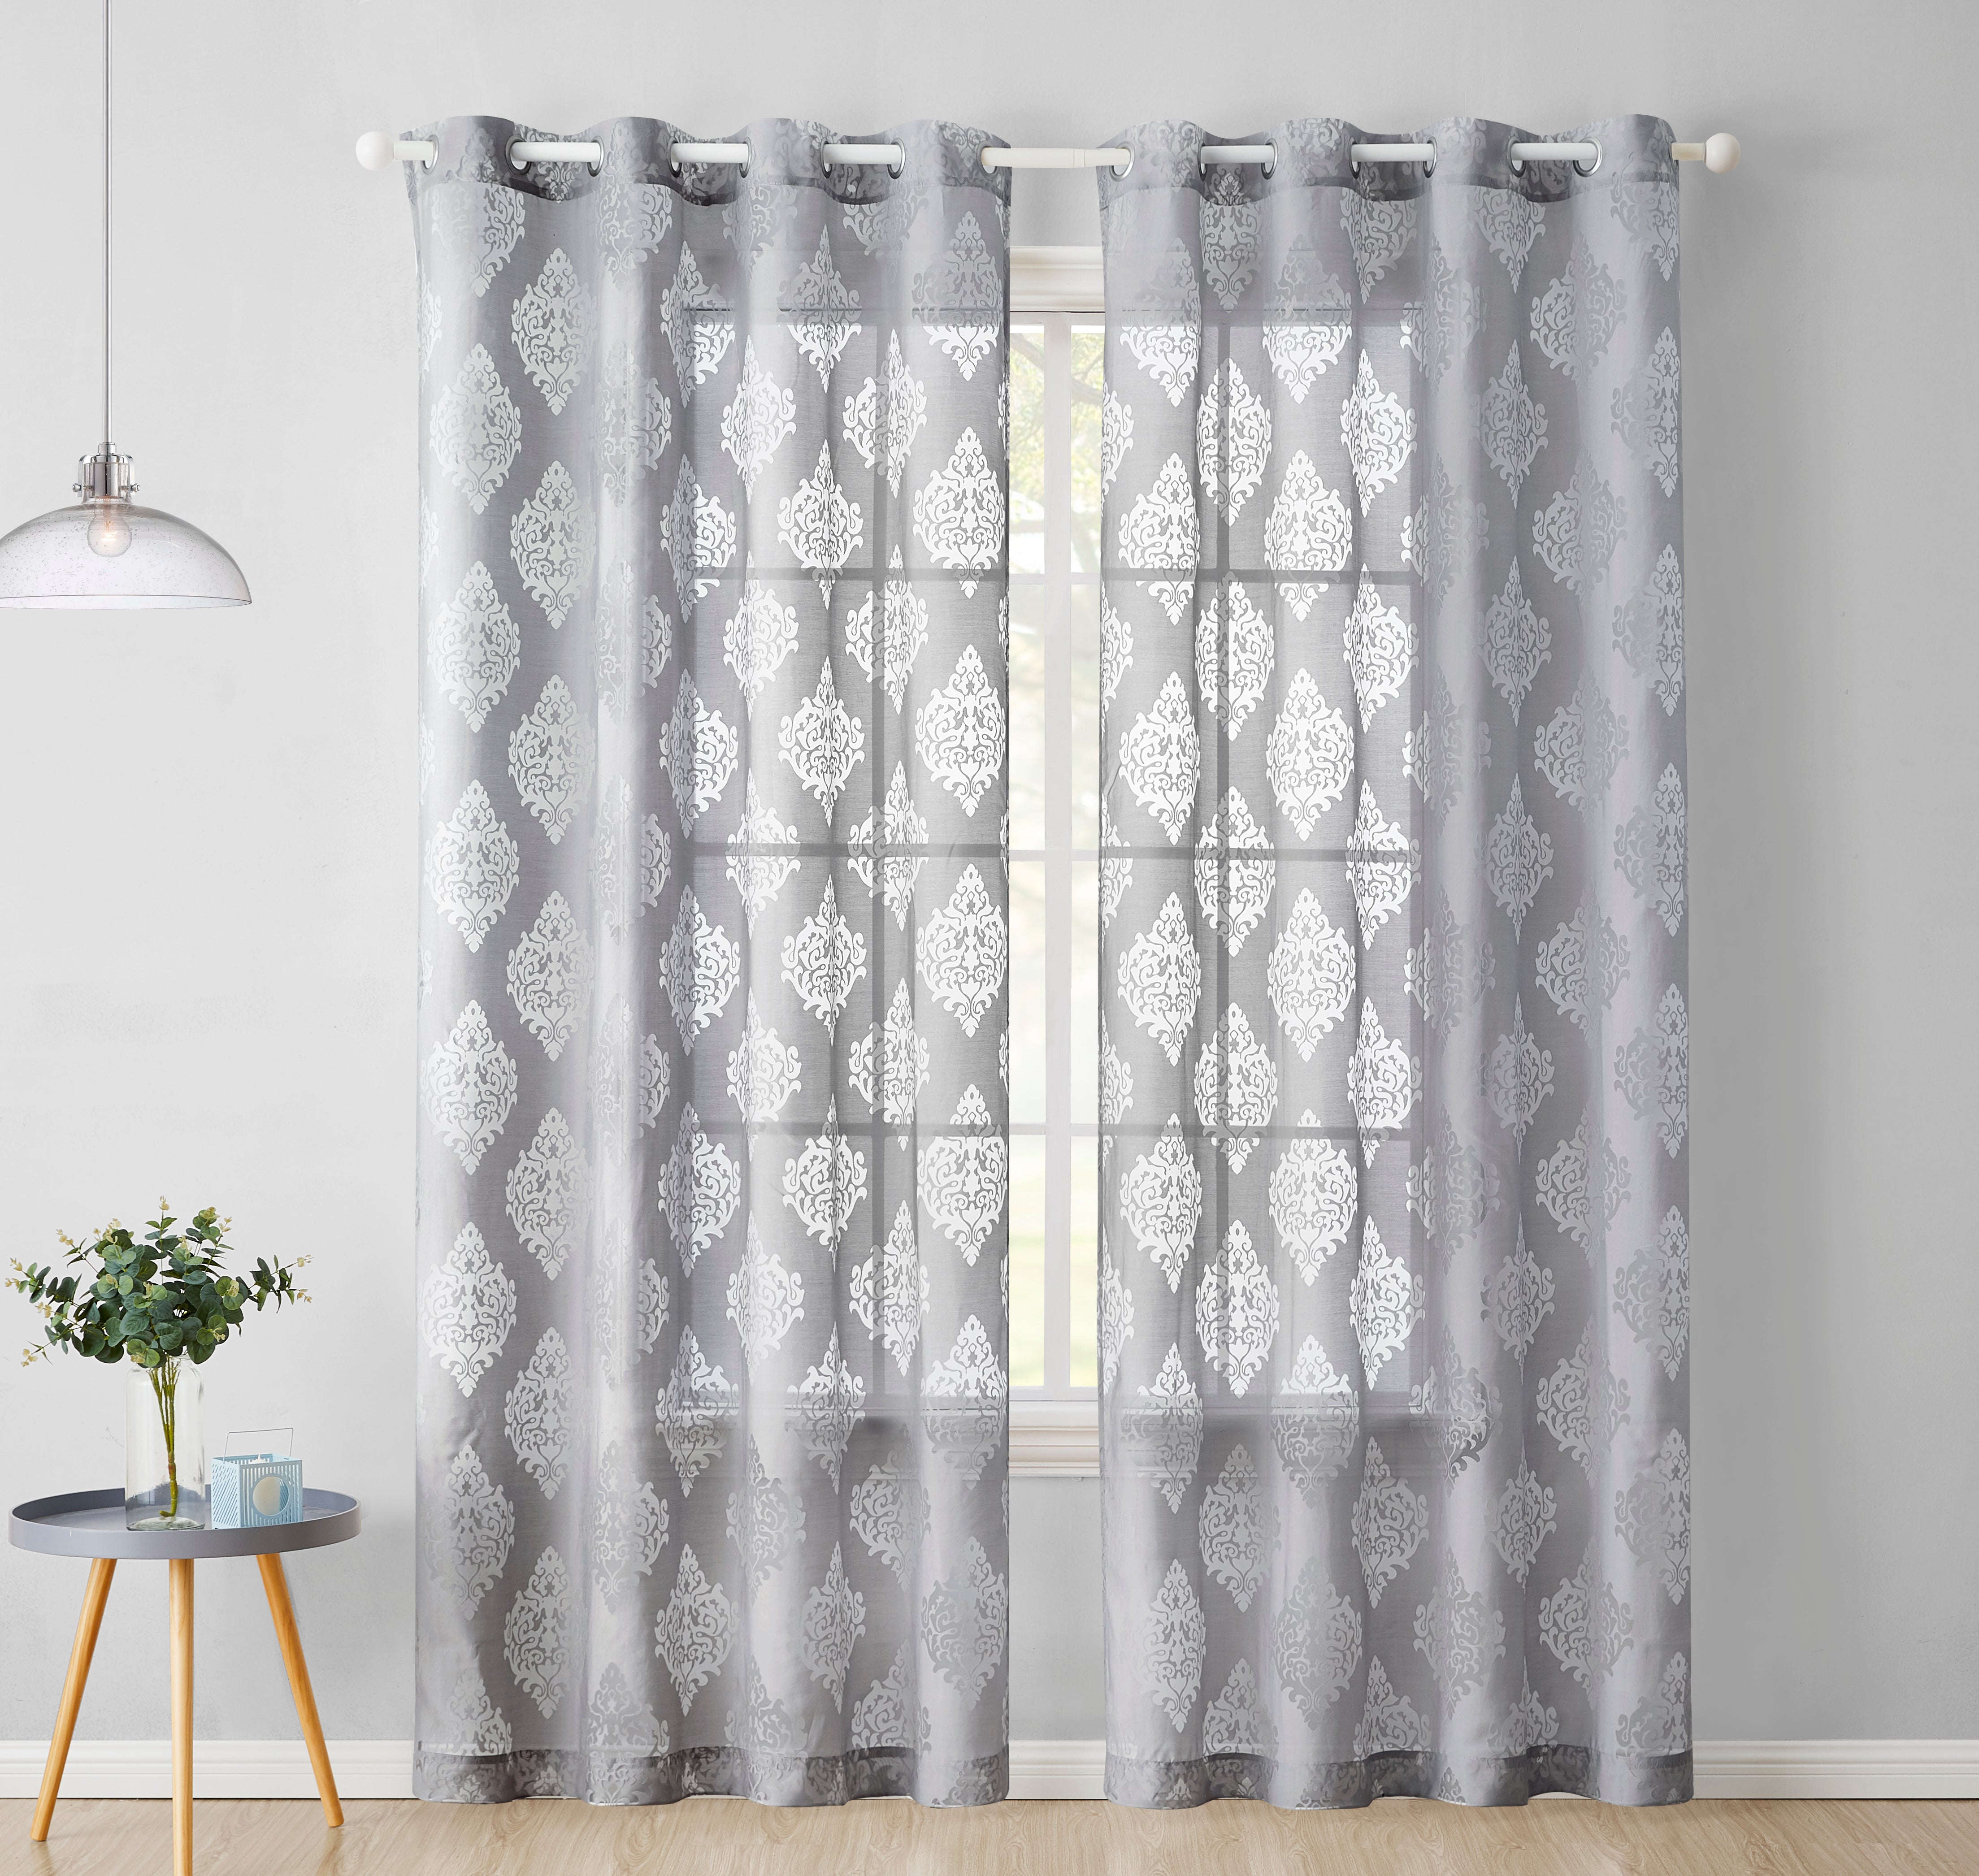 When To Hang Sheer Curtains